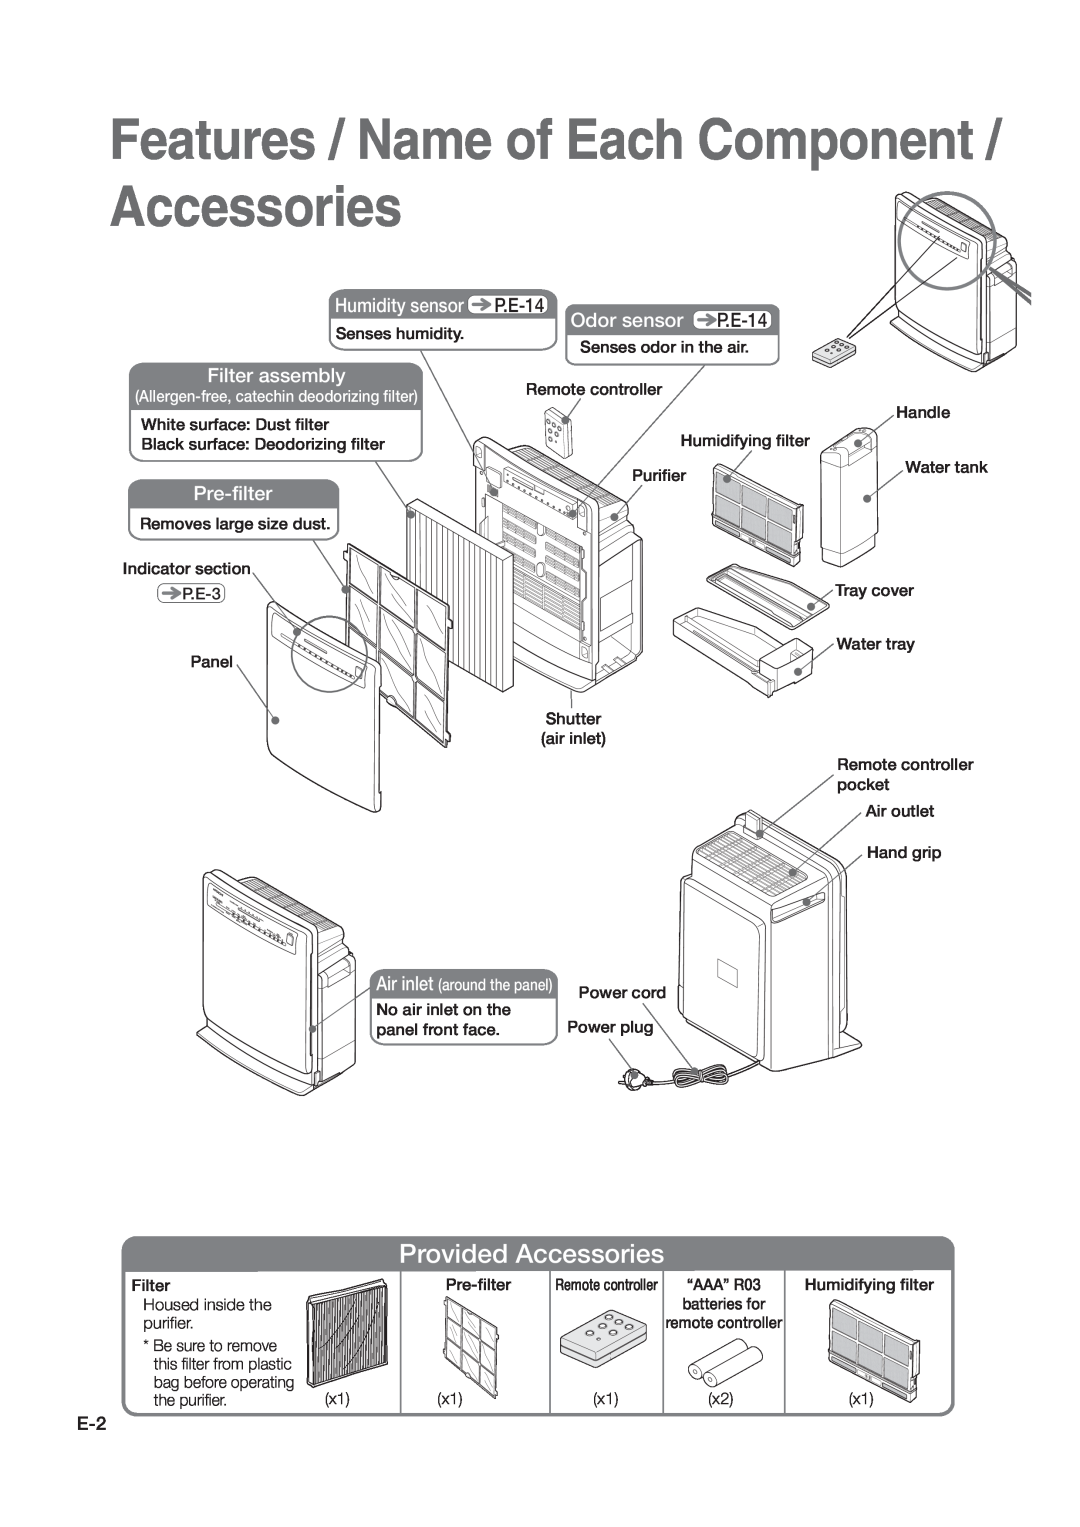 Hitachi hitachi air purifier with humidifying function instruction manual Features / Name of Each Component / Accessories 